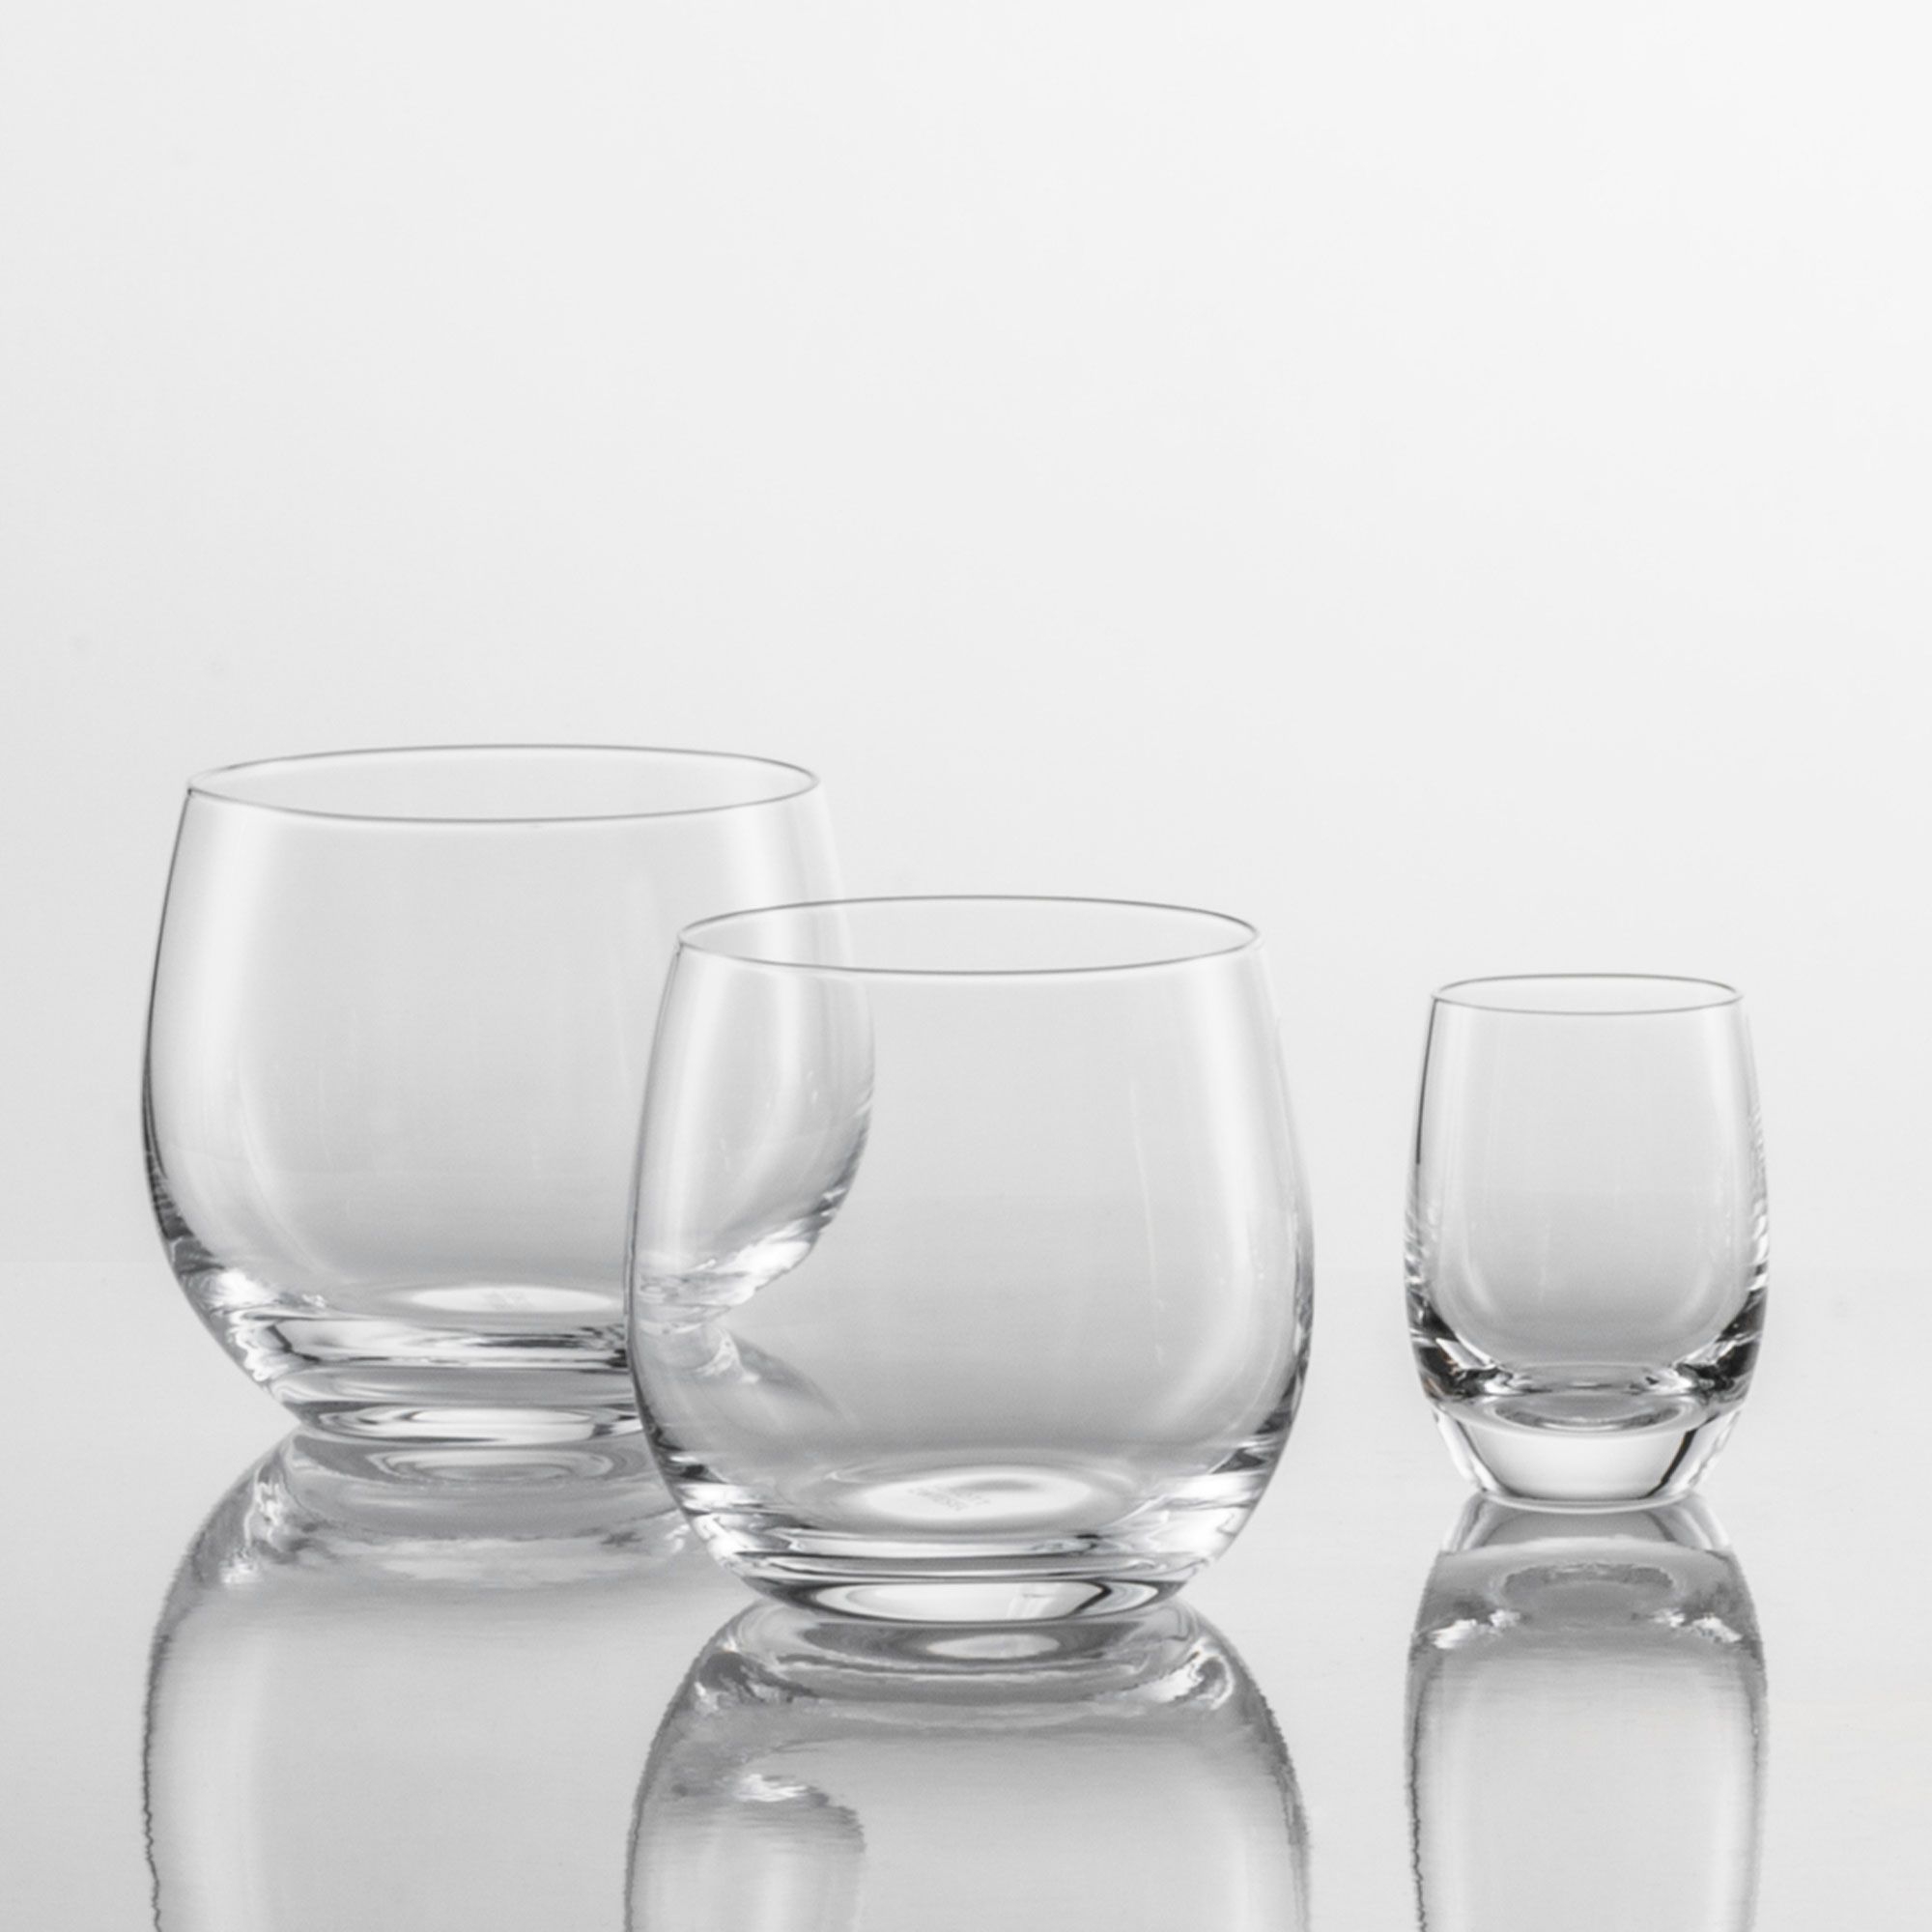 Schott Zwiesel - Shot glasses For You 35 - Set of 4